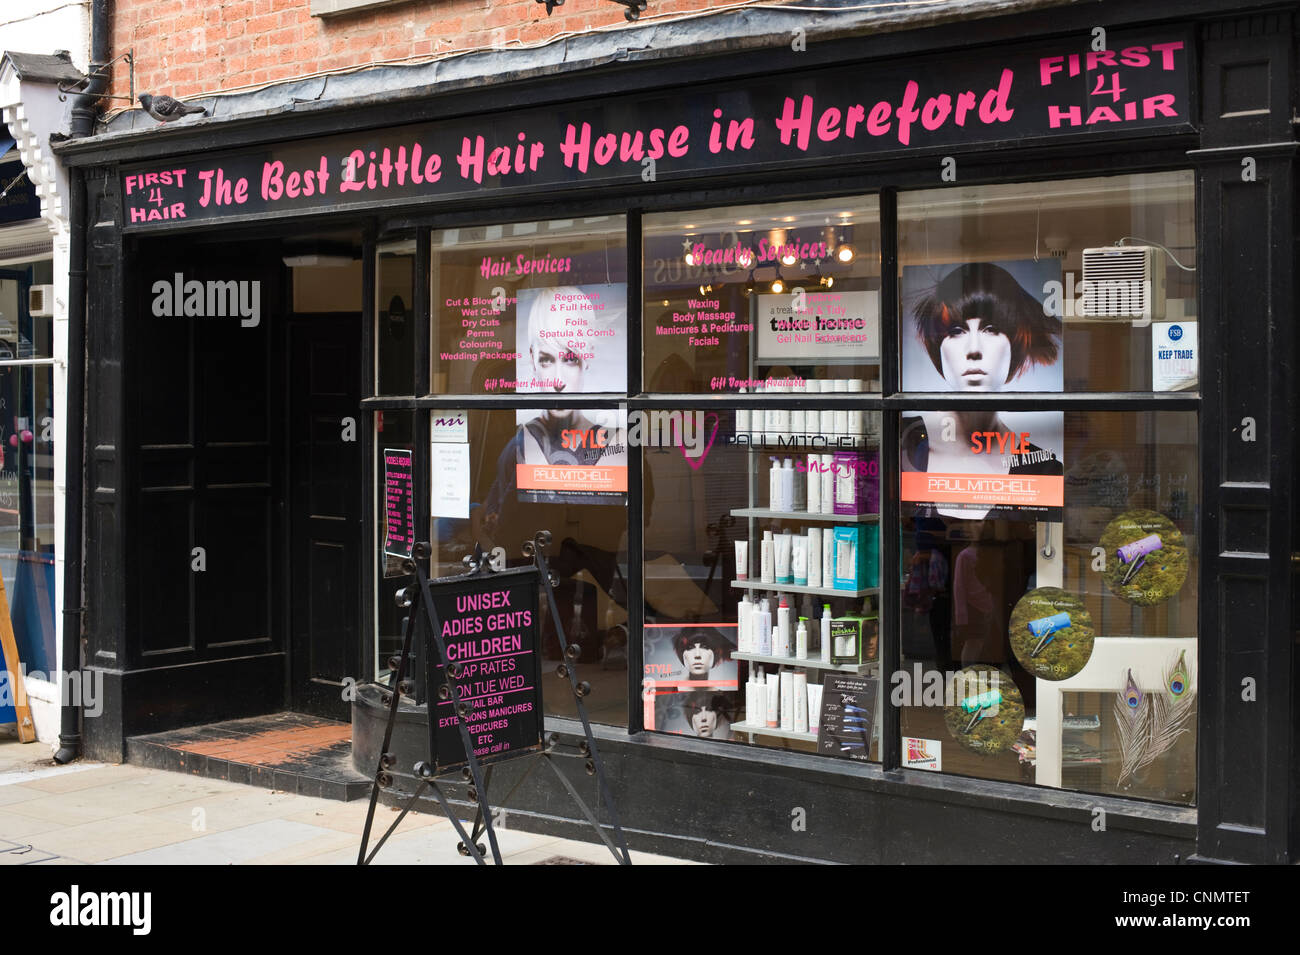 THE BEST LITTLE HAIR HOUSE IN HEREFORD Hairdressers City Centre Of